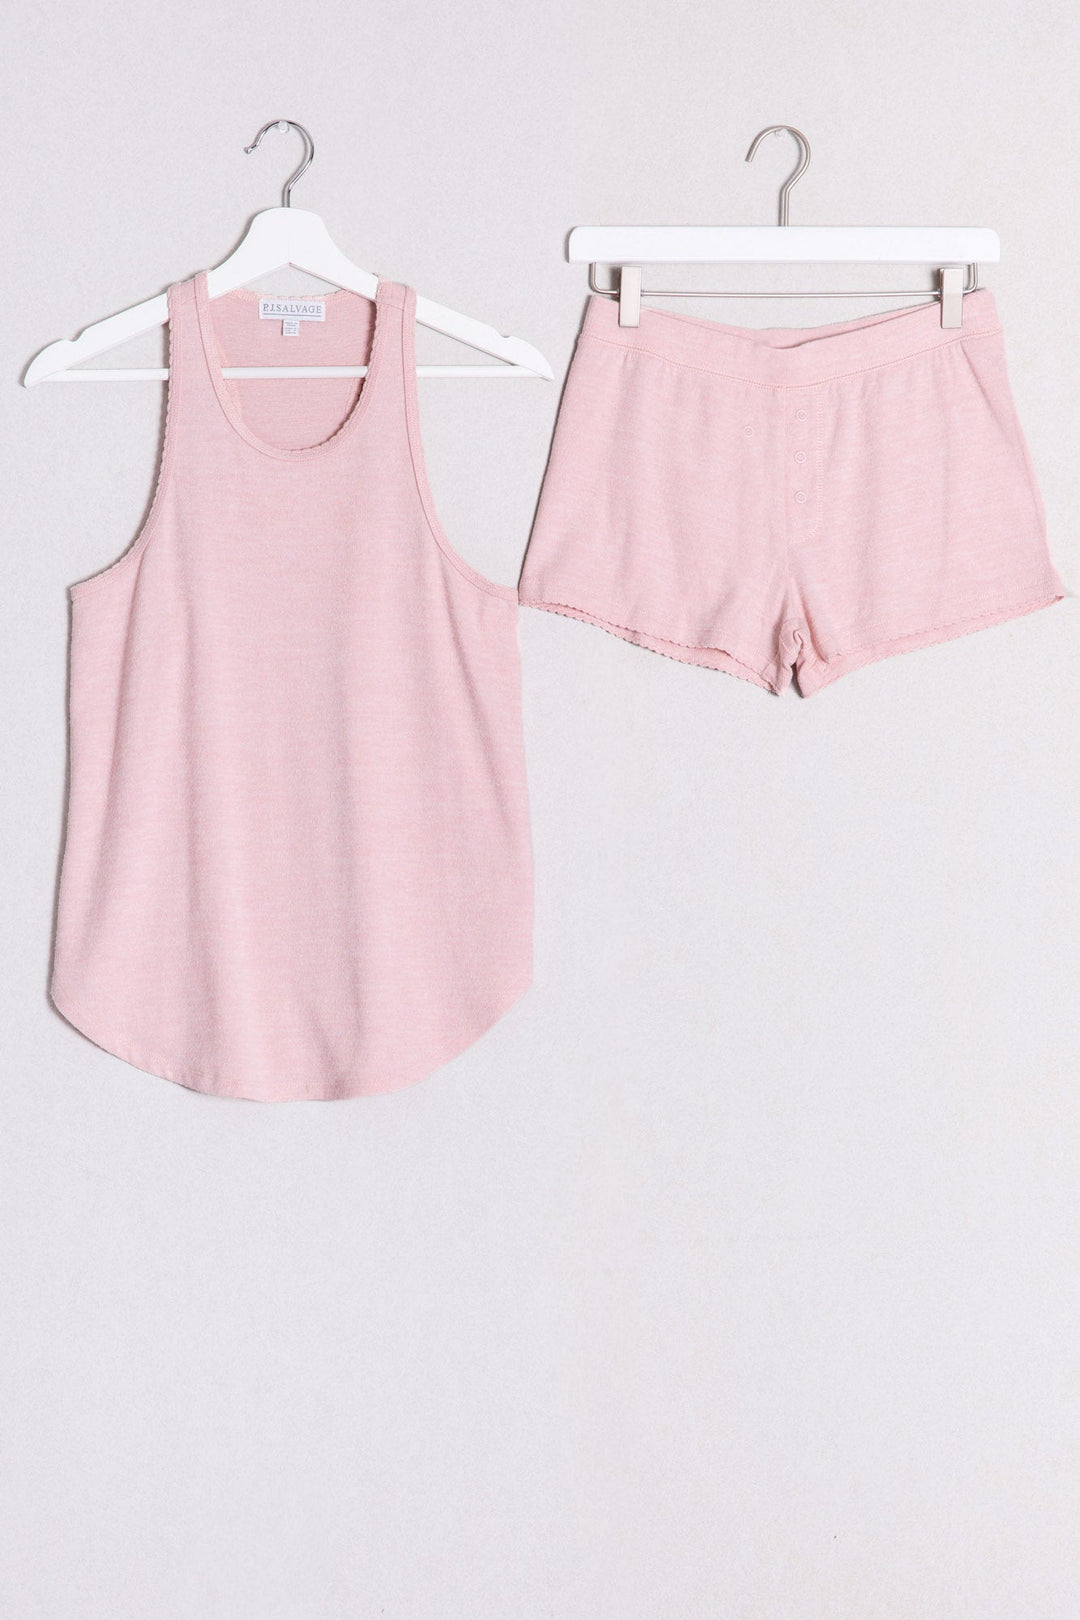 Recycled REPREVE® jersey pale pink lounge set with picot trim. Racerback tank with matching short.  (6612550287460) (7105225392228)